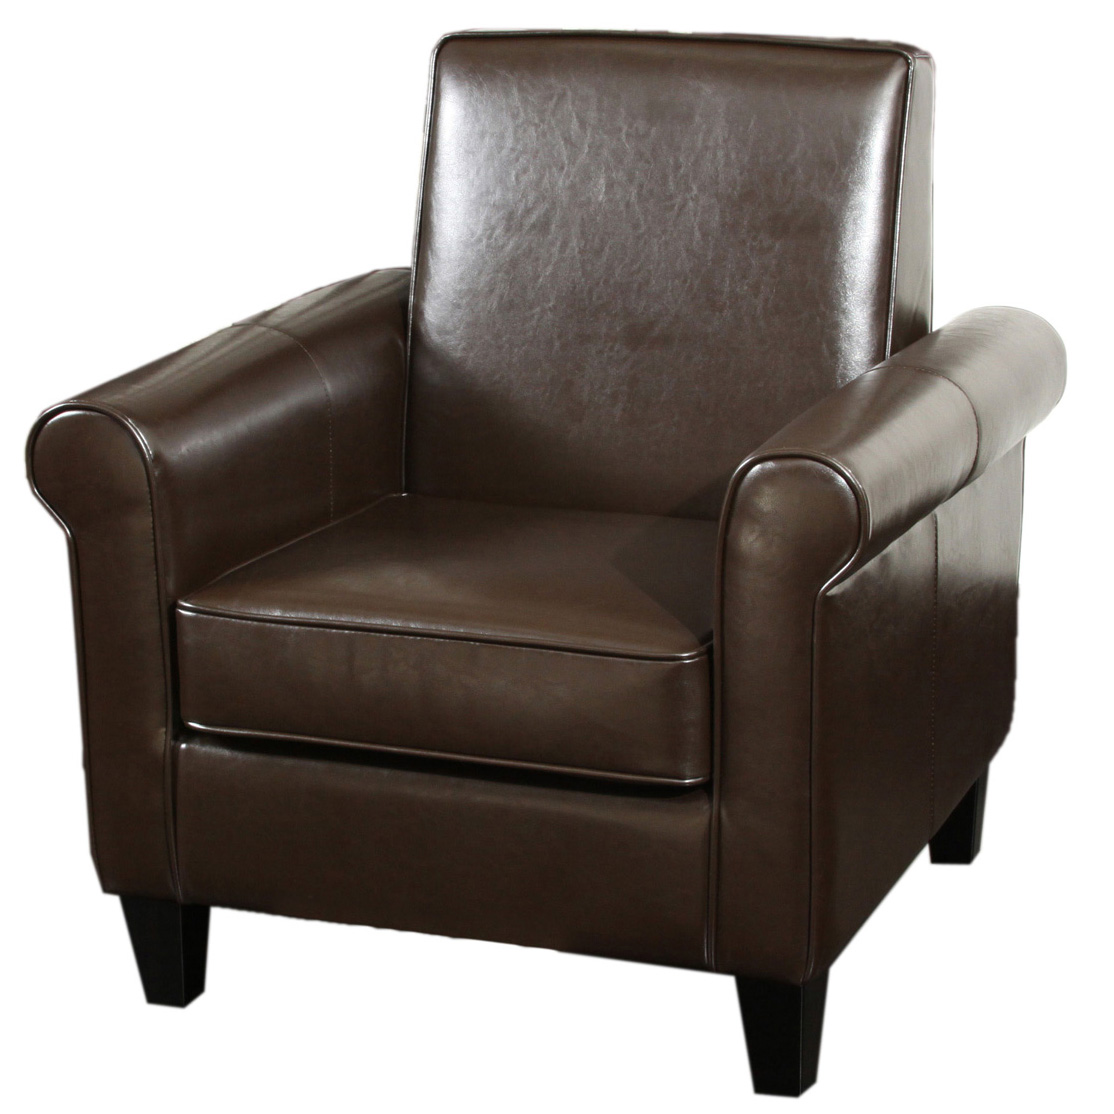 Freemont Chocolate Brown Club Chair